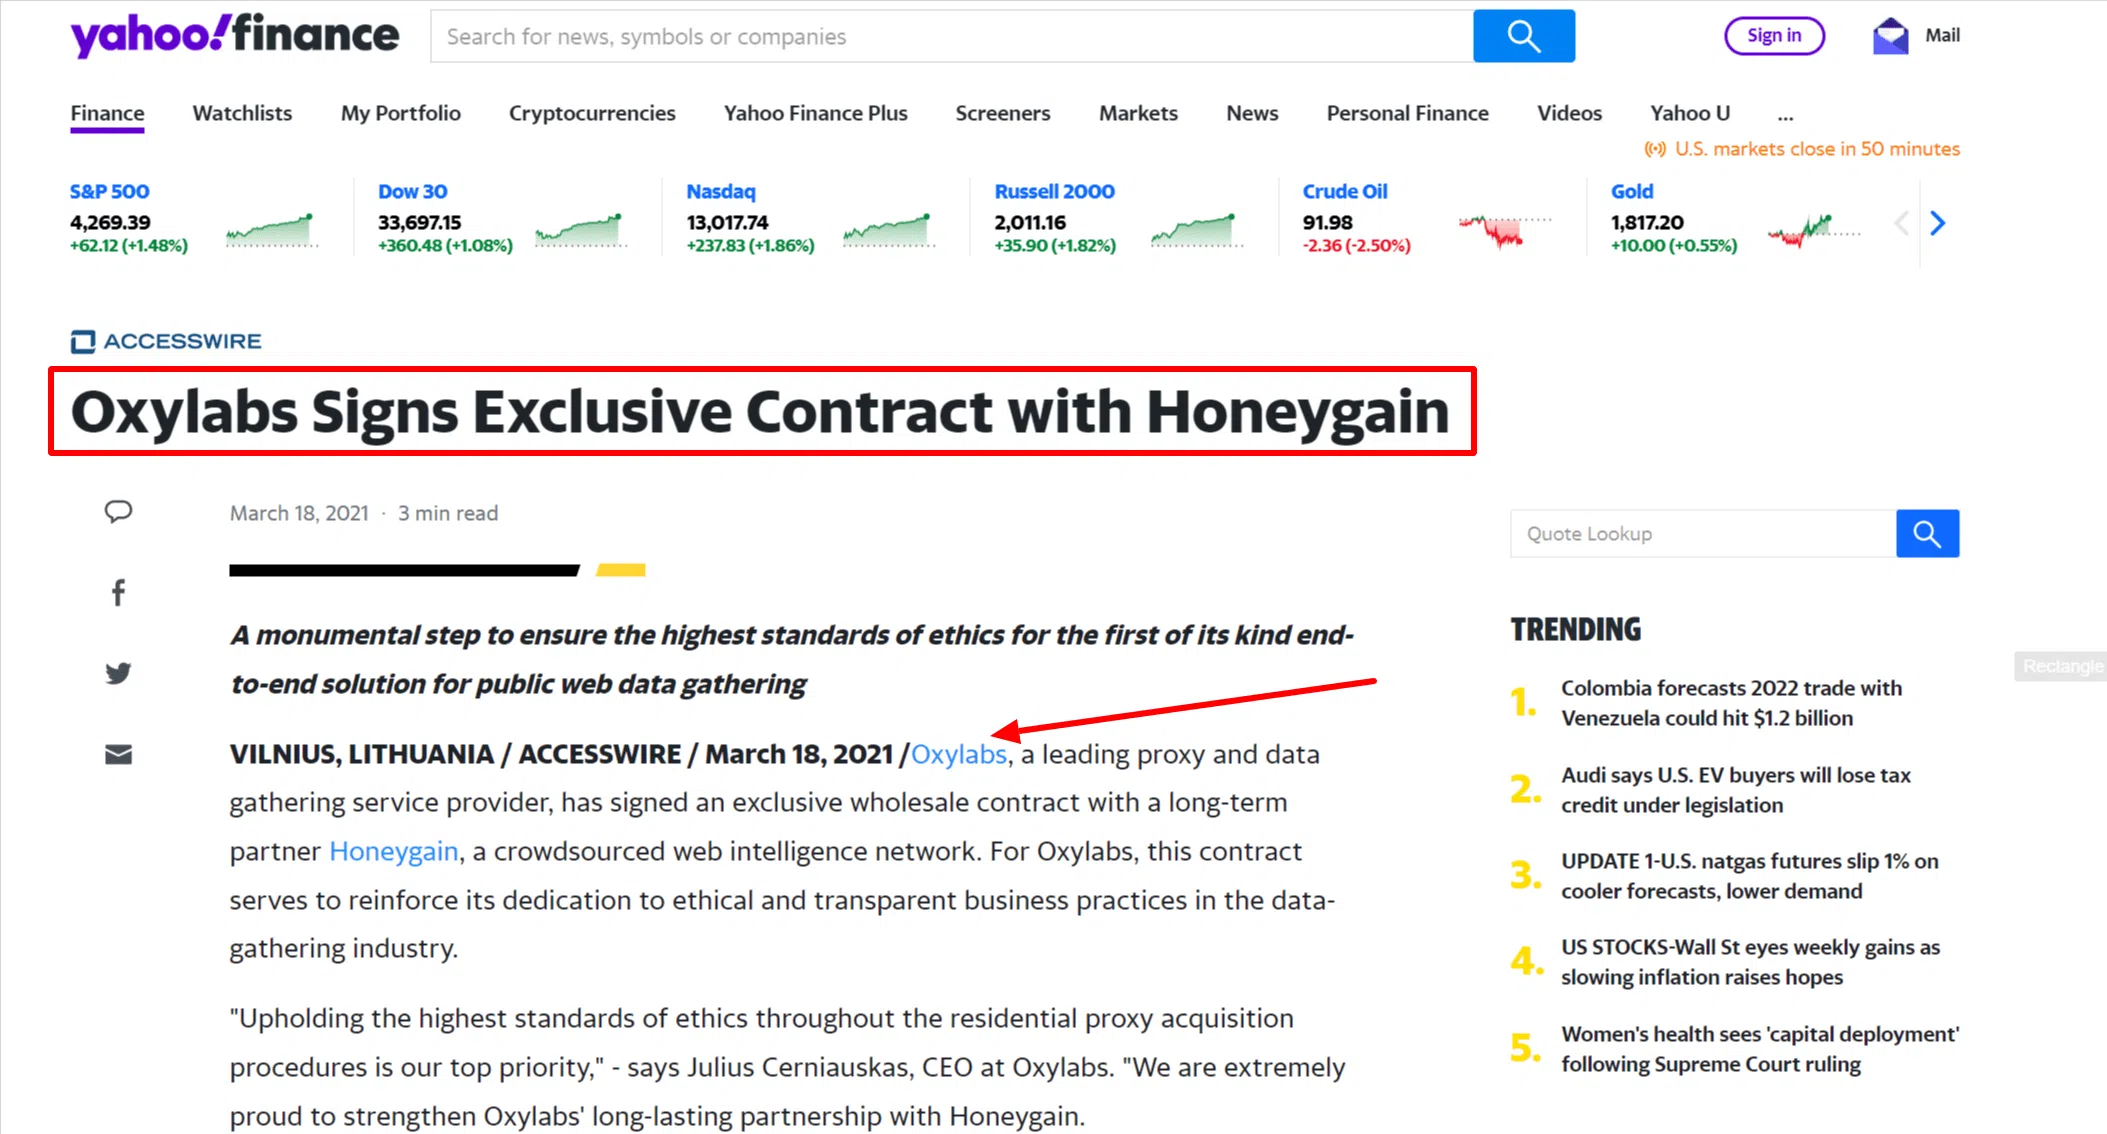 Oxylabs Signs Exclusive Contract with Honeygain